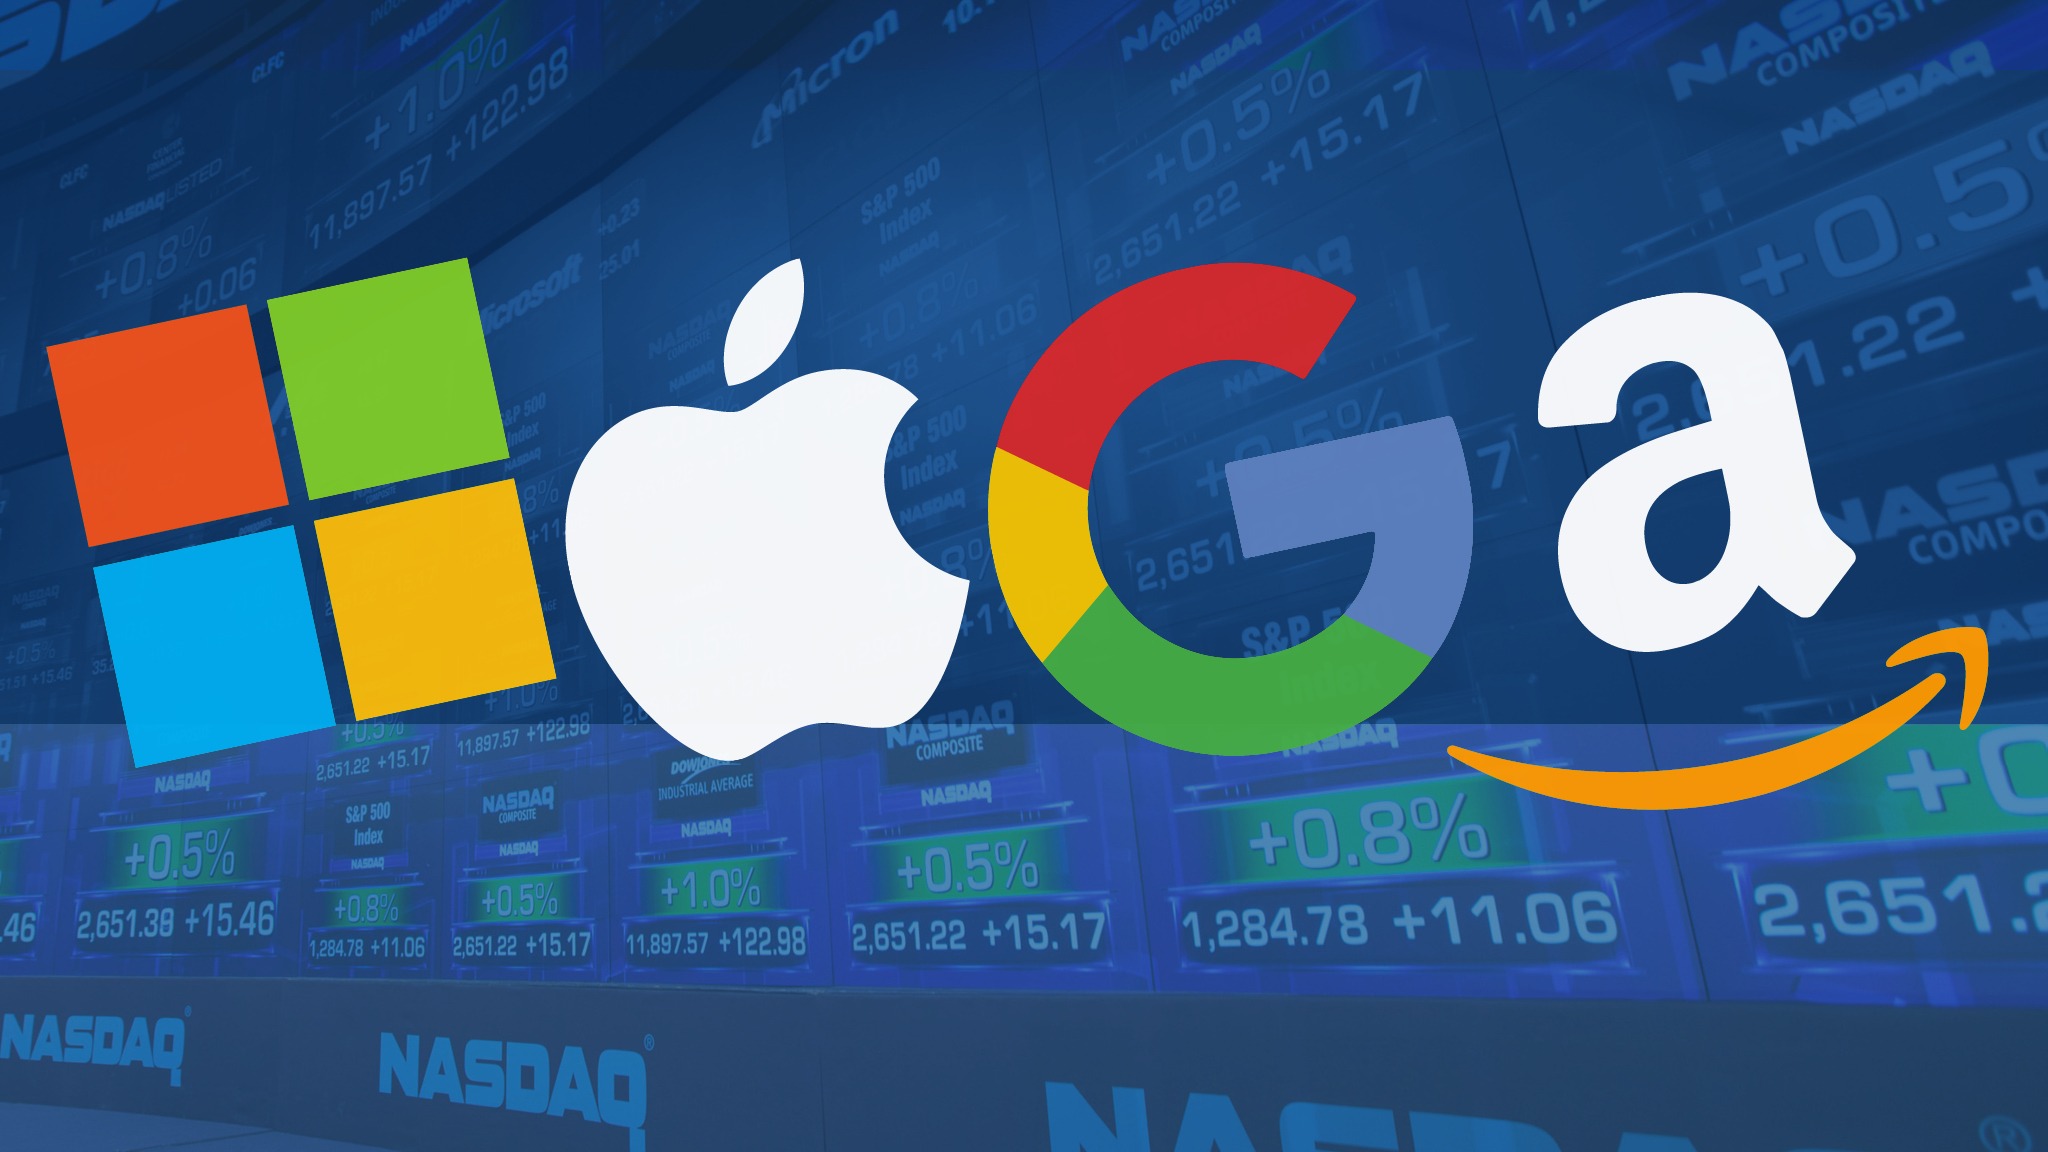 WARC Report: Big Tech's Shares Growing Significantly In Post-Covid Era